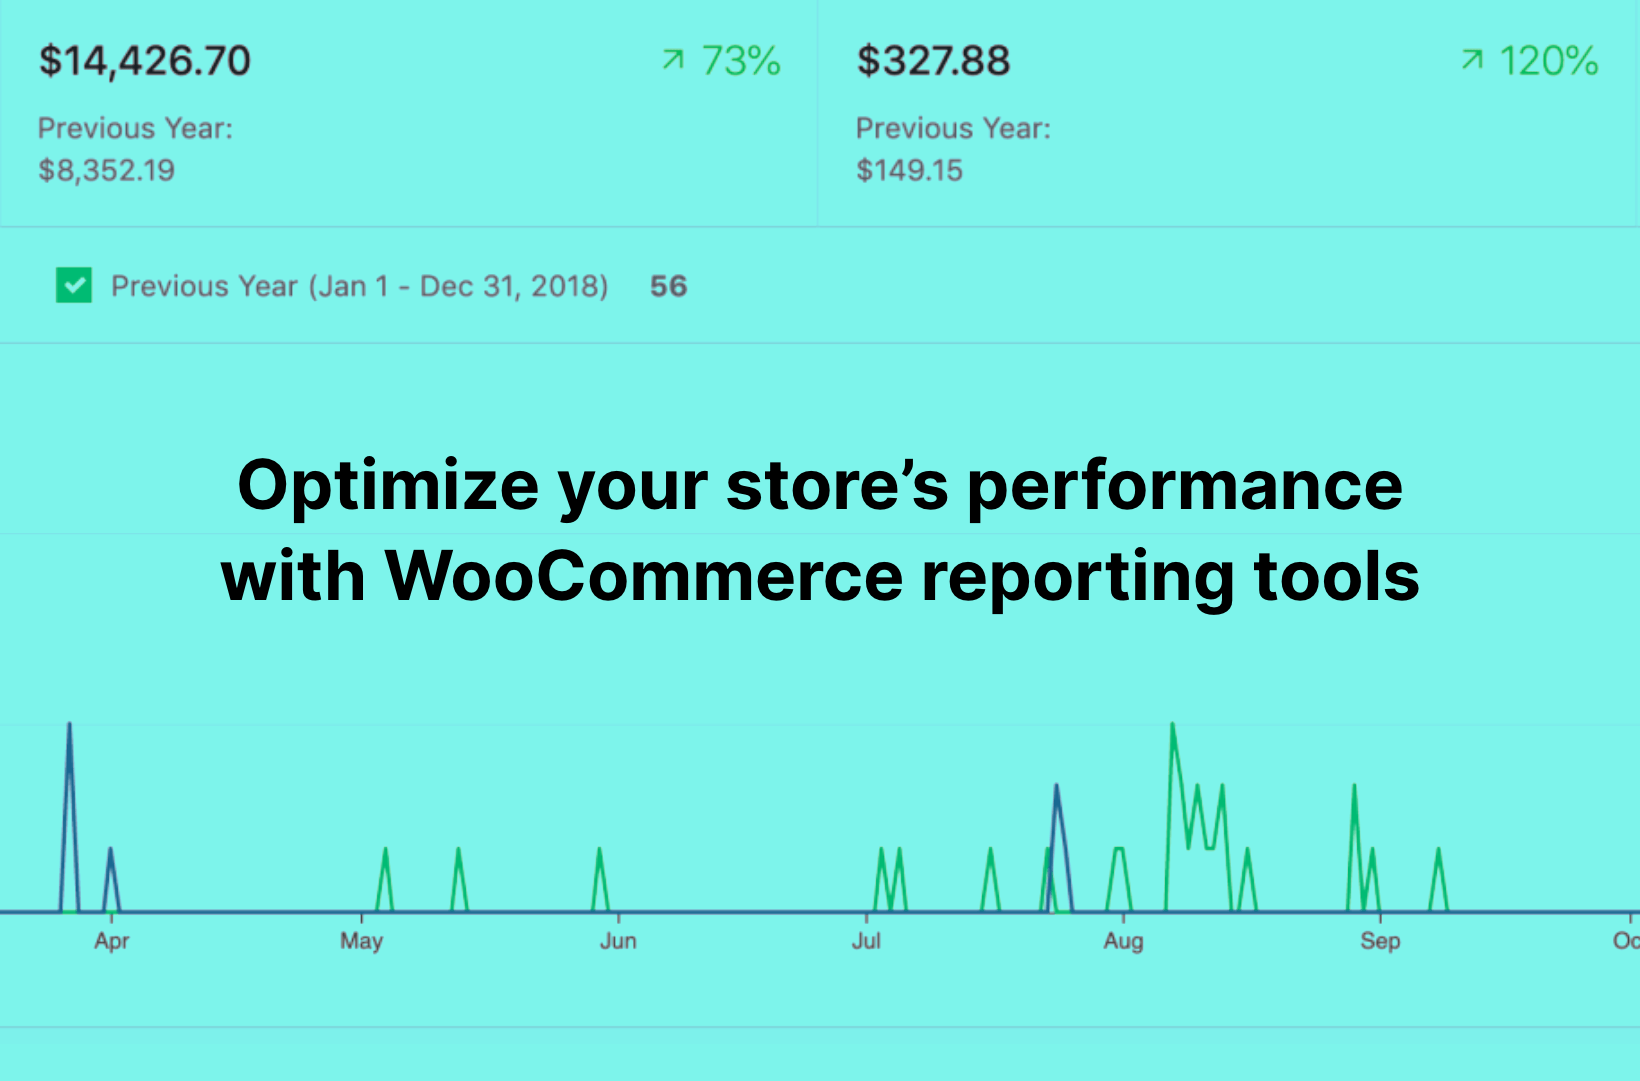 Optimize your store’s performance with WooCommerce reporting tools